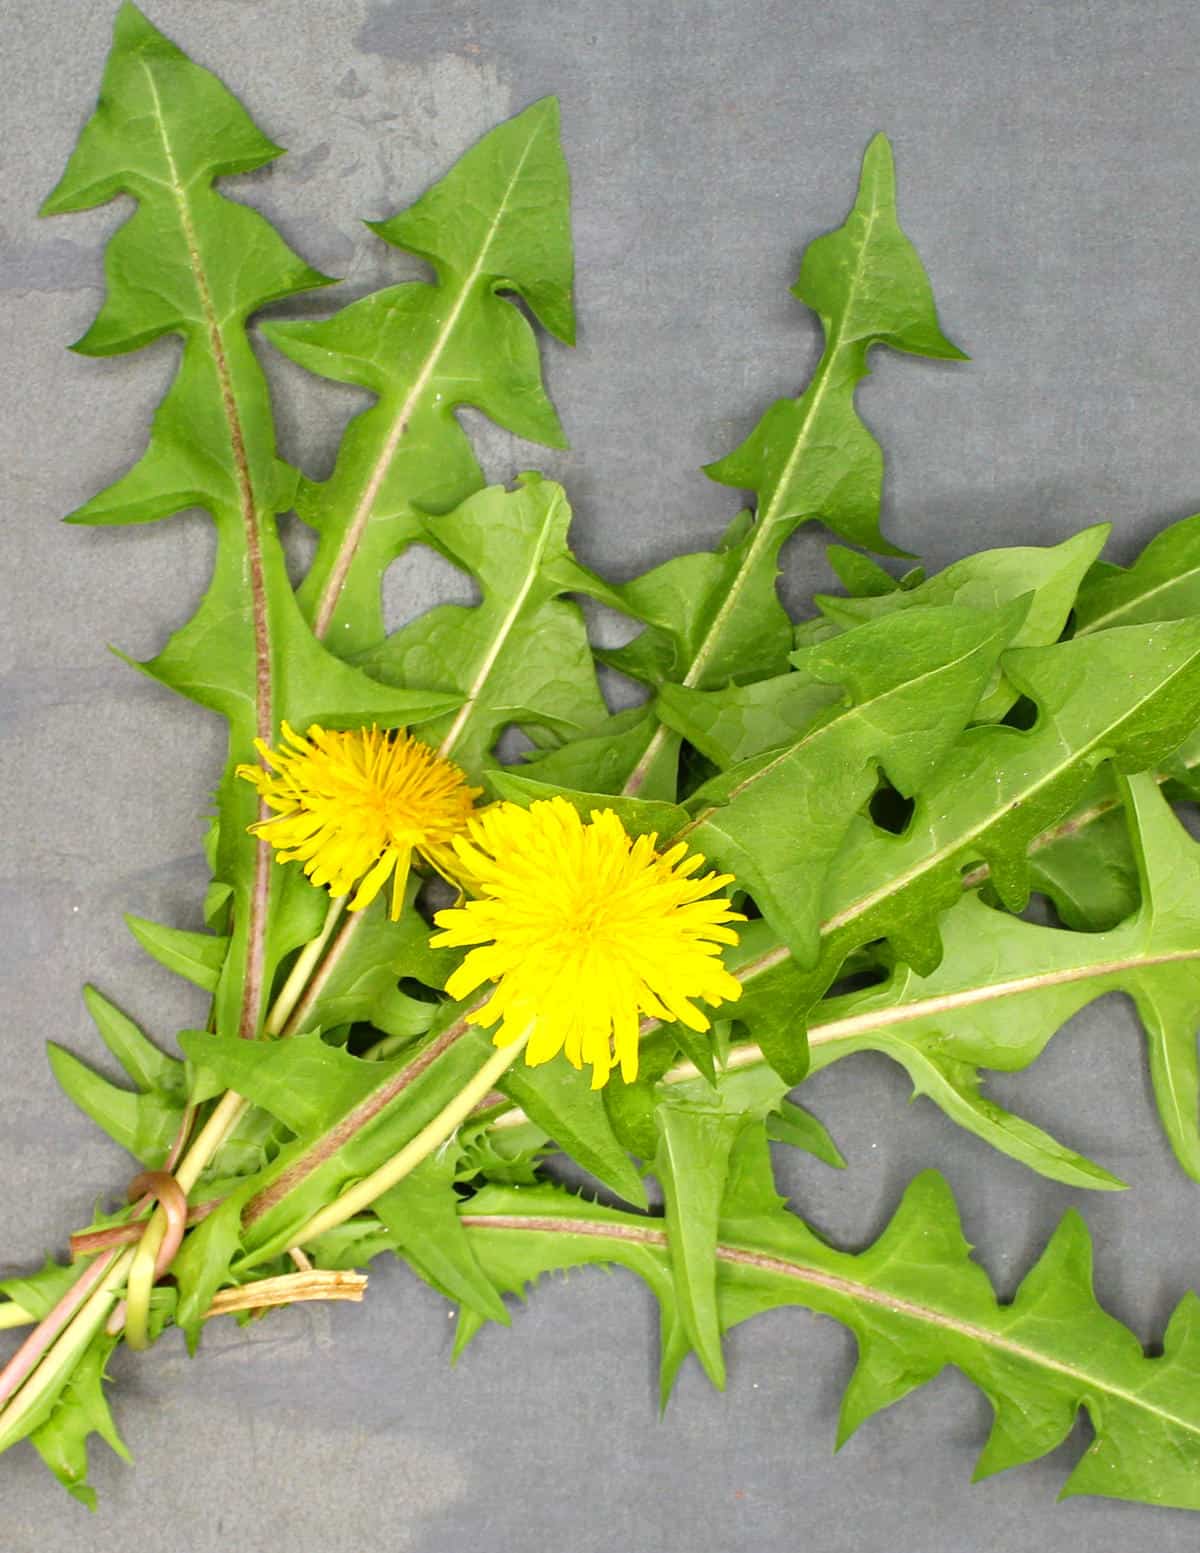 Dandelion greens and flowers.